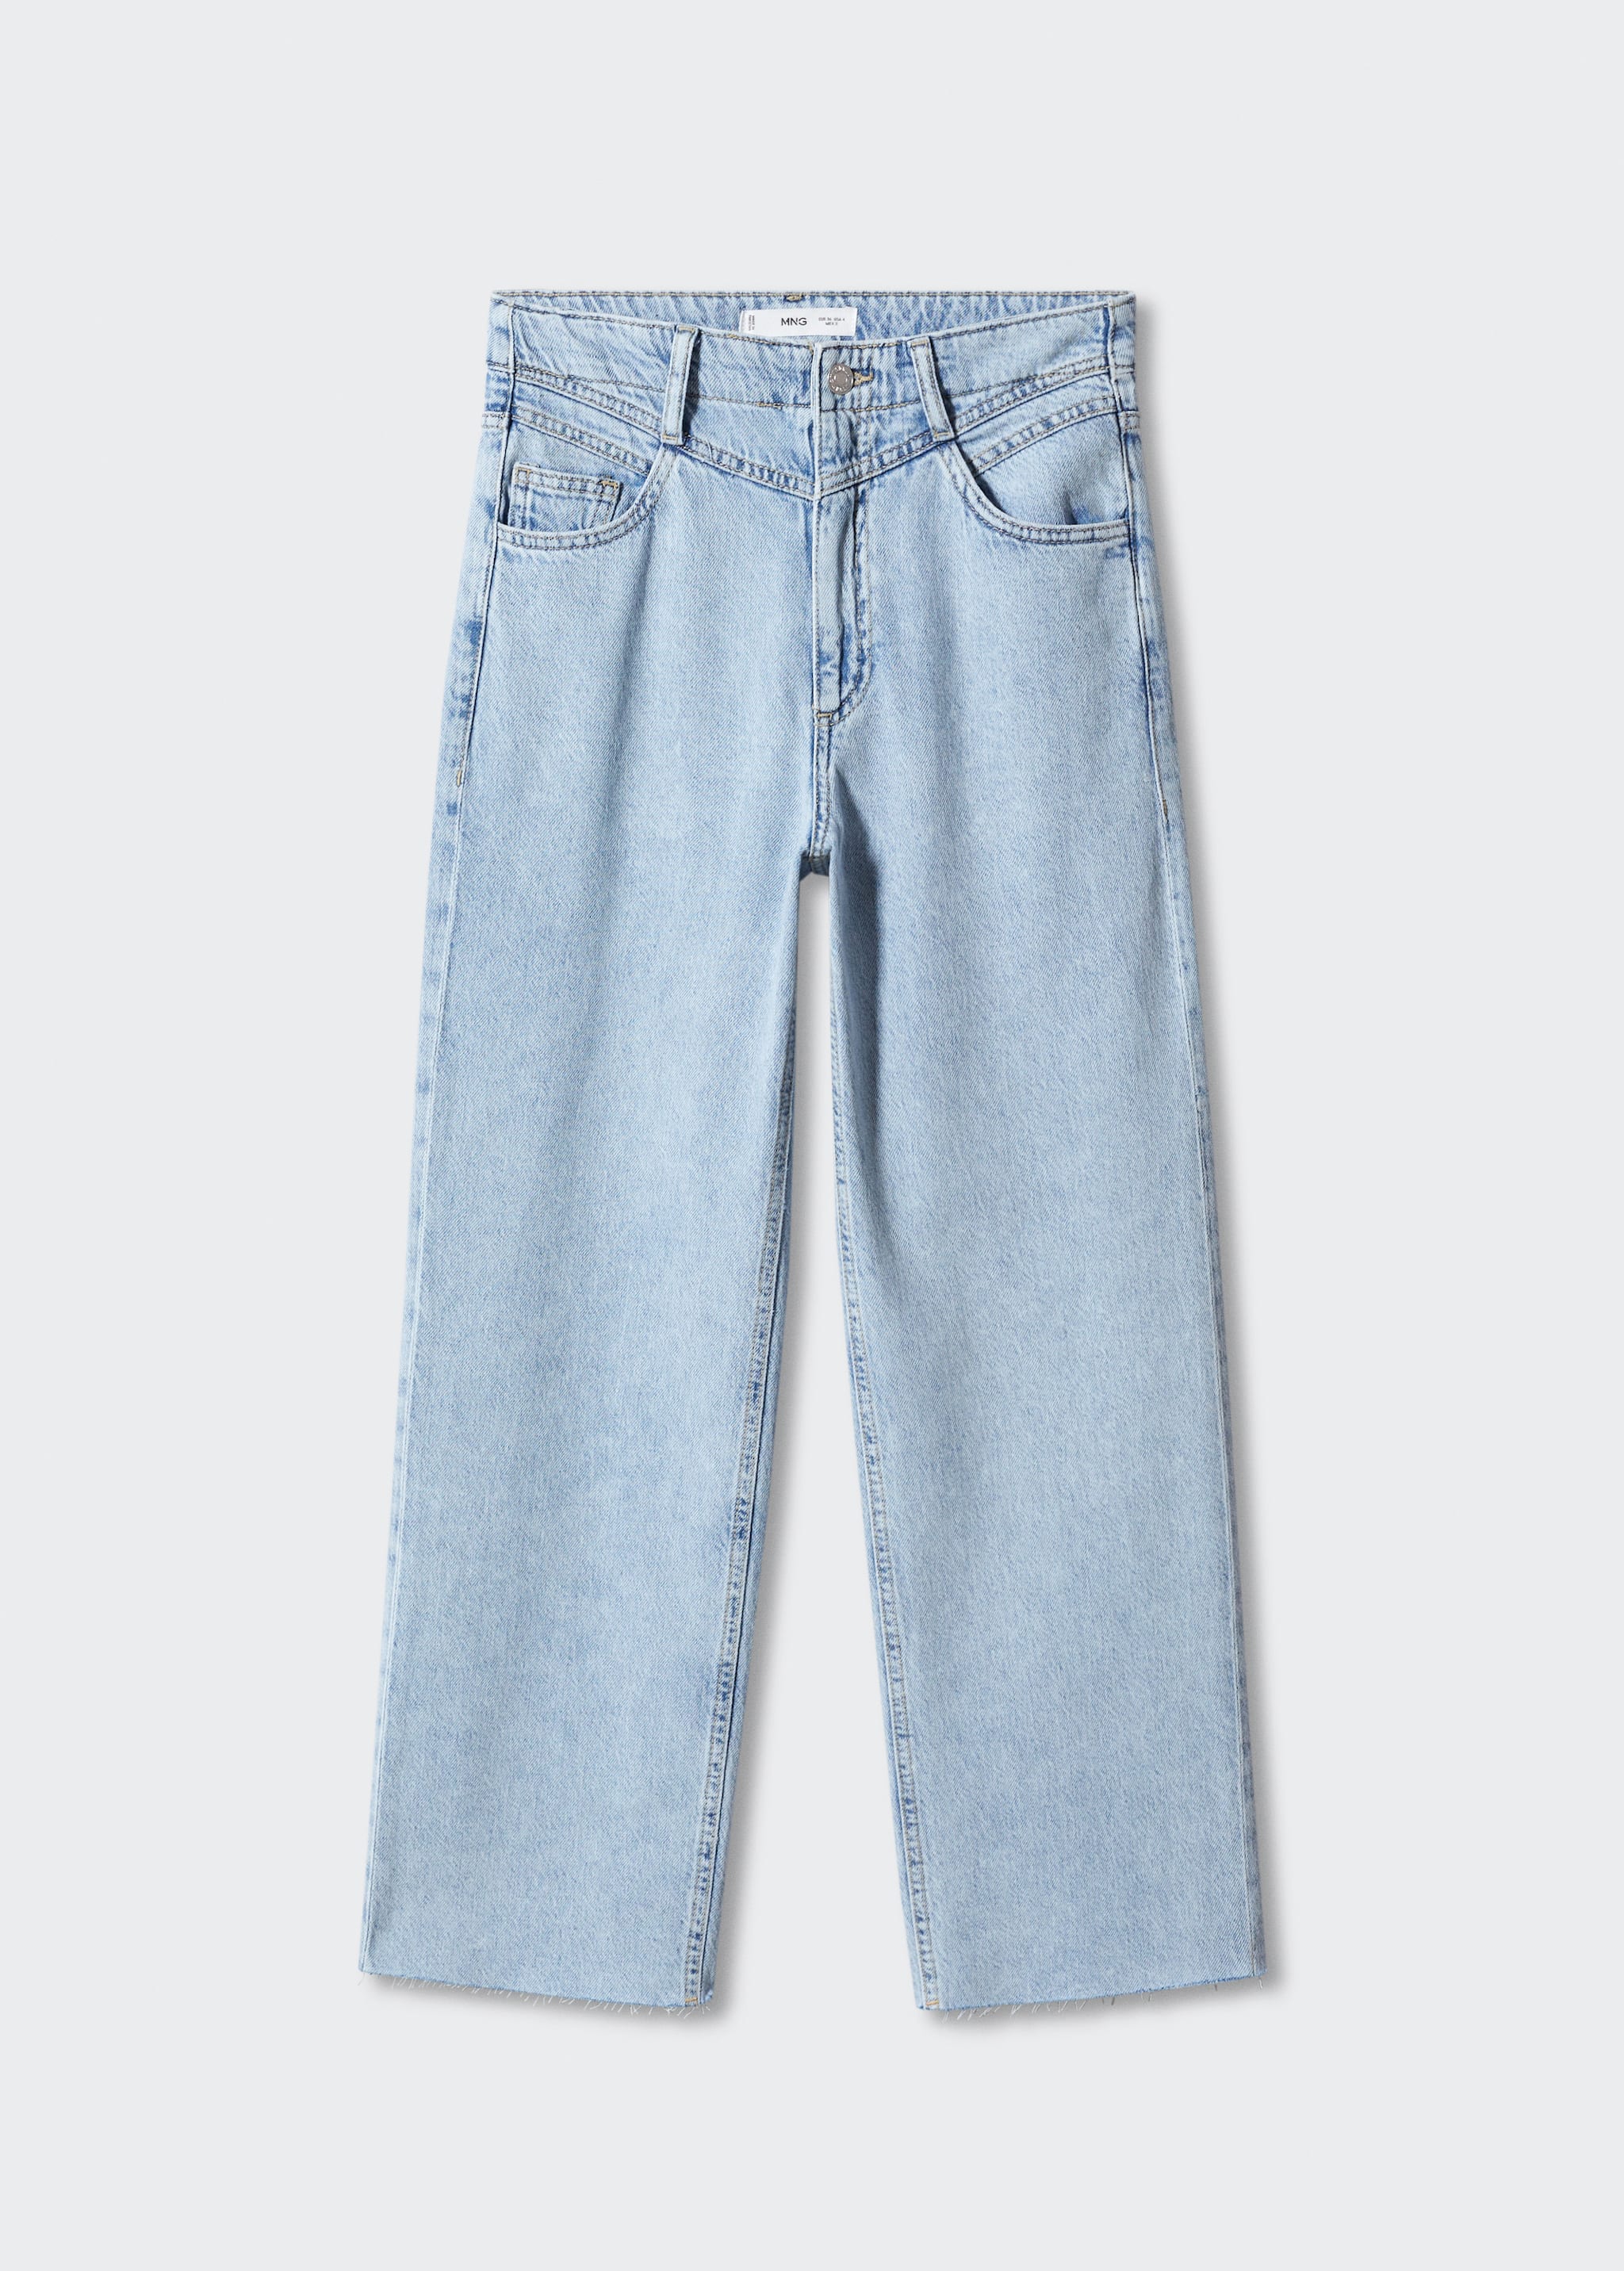 Wideleg low frayed hem jeans - Article without model